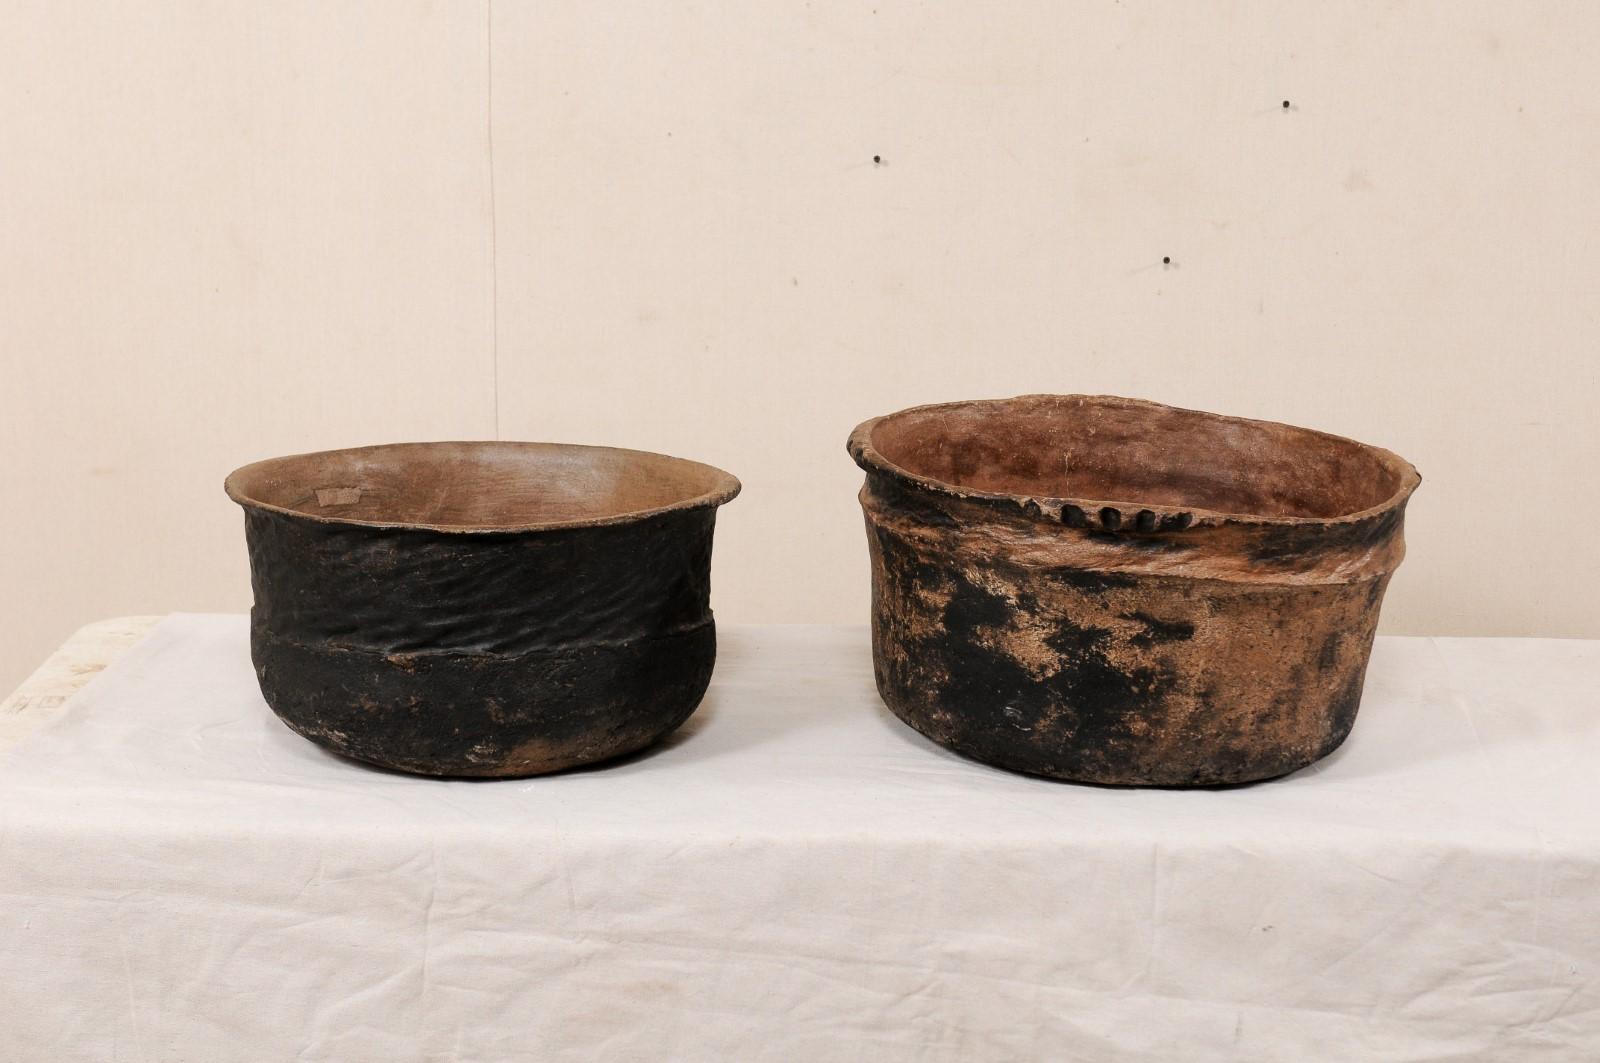 A pair of Guatemalan clay cooking pots from the early 20th century. These antique vessels from Guatemala made of clay, each have rounded forms with rustic, decorative texture on their exteriors. They have a darker exterior and a wonderful old patina